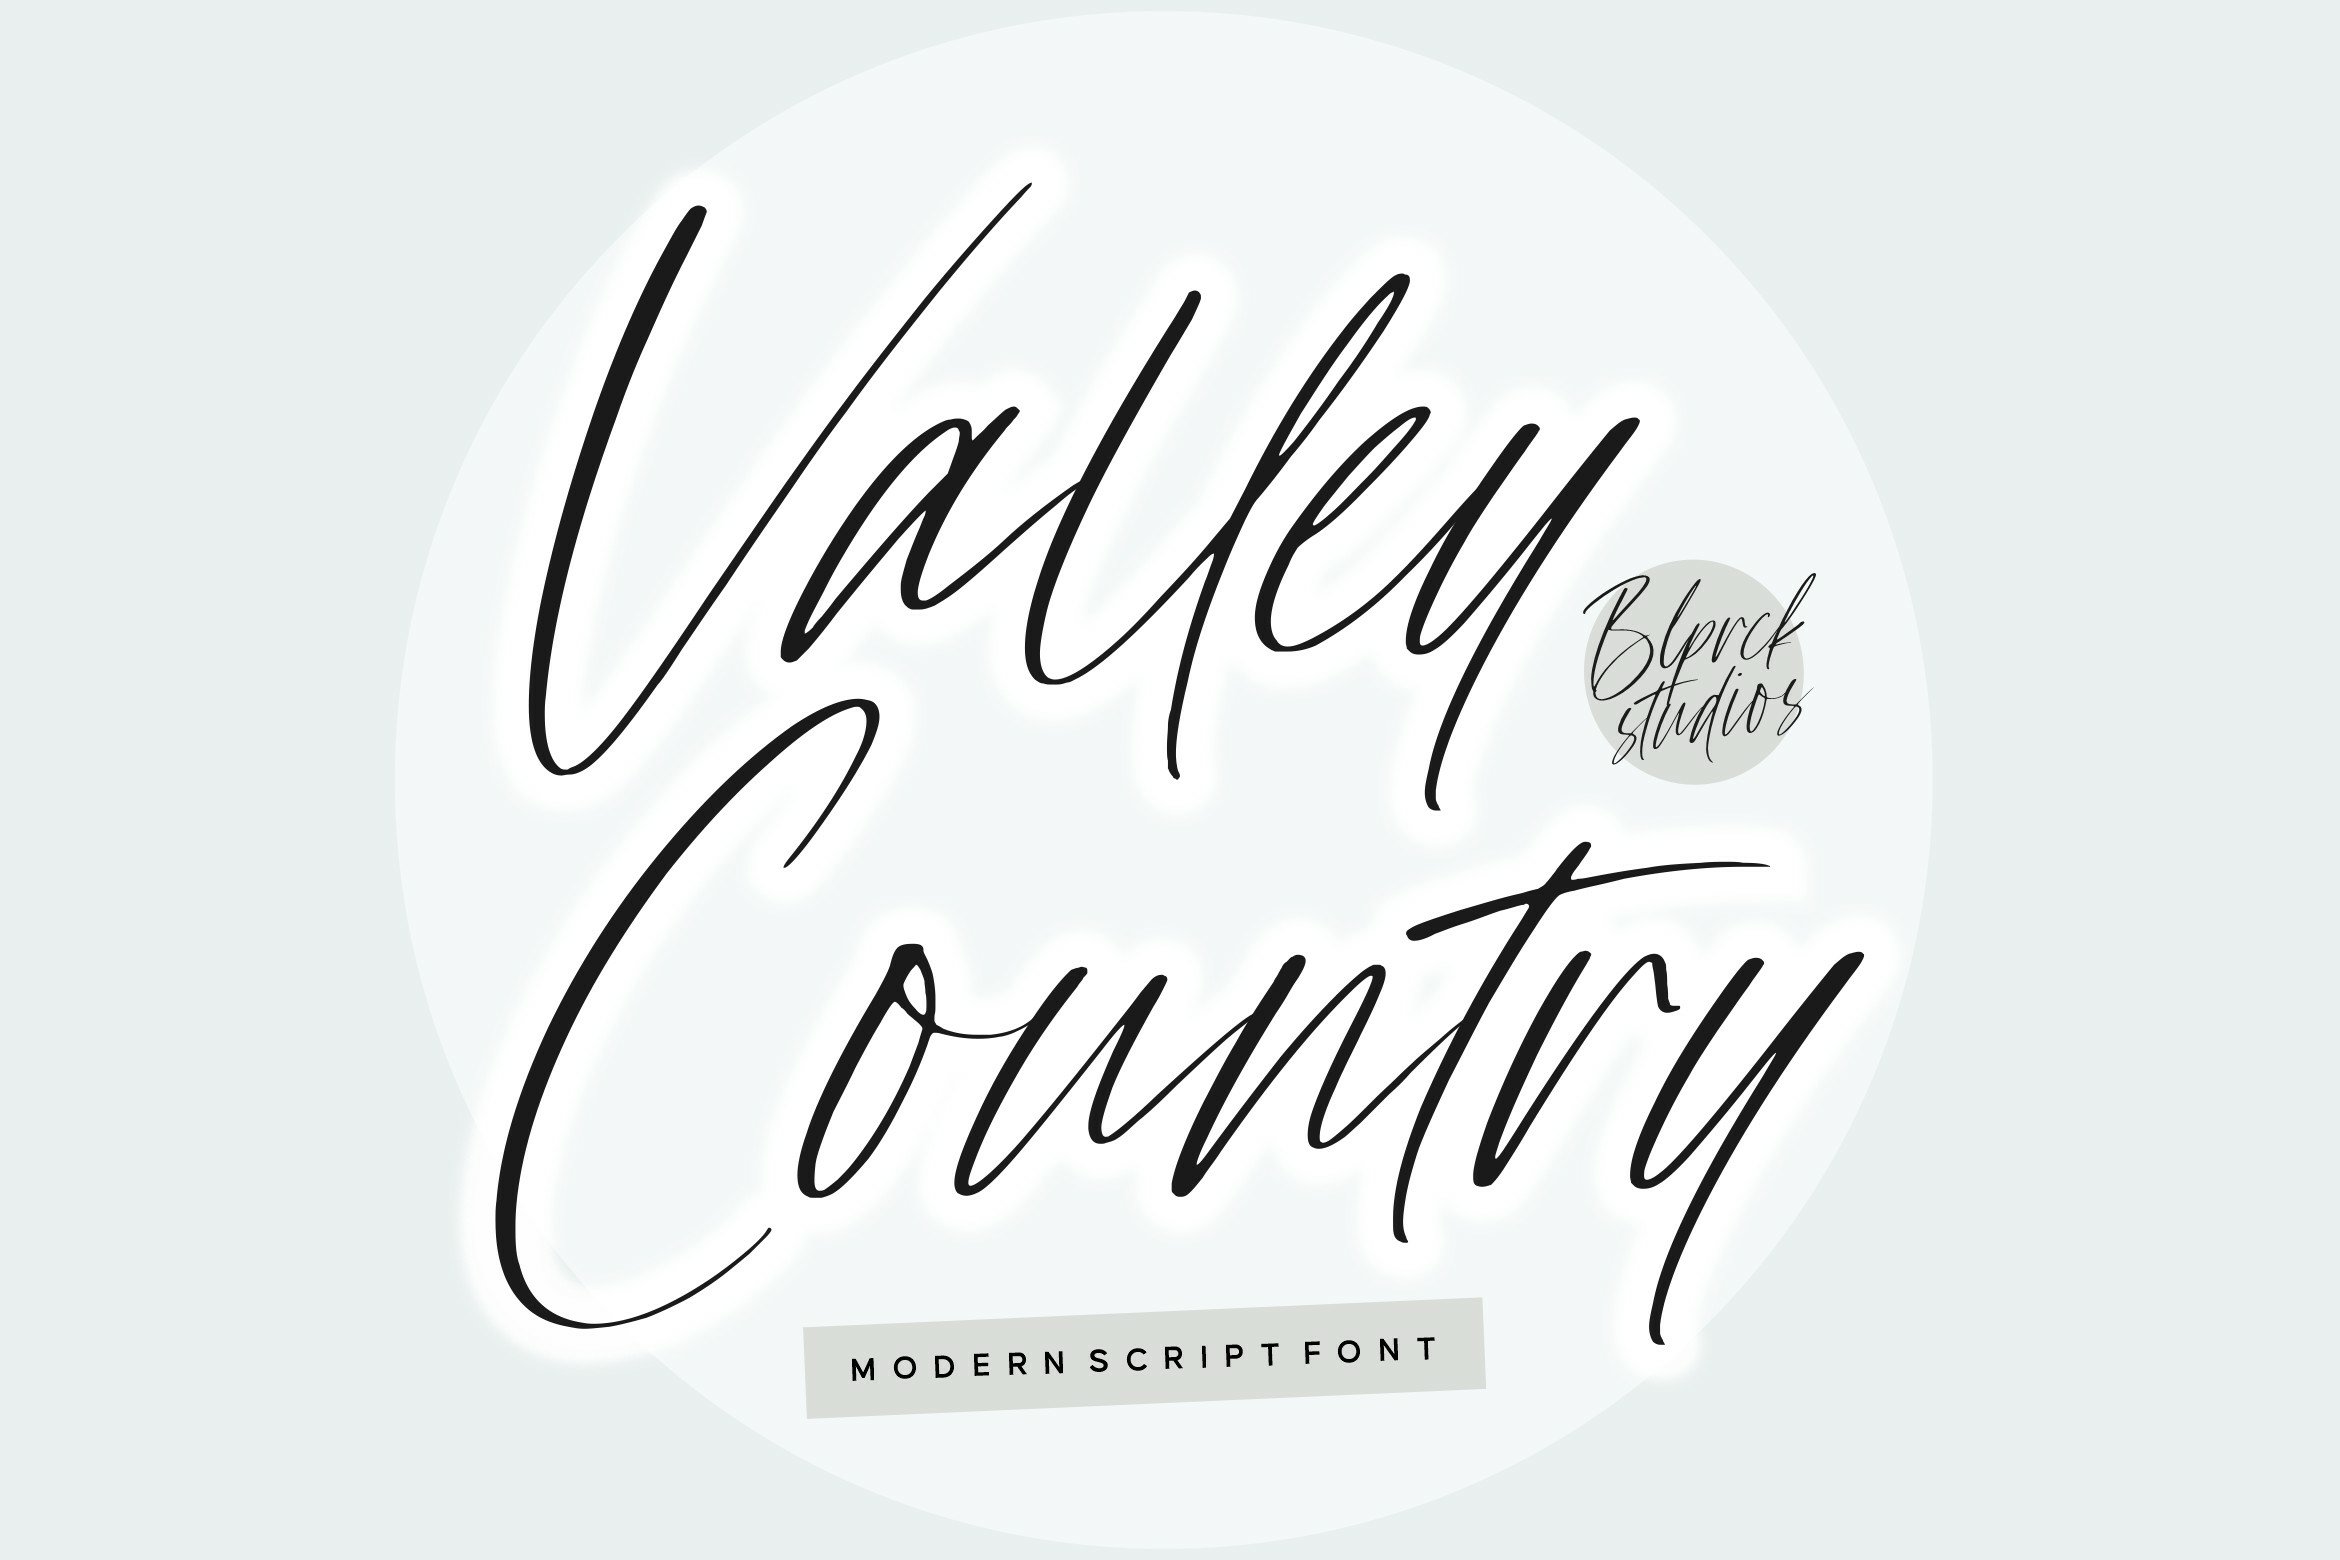 Valley country 1